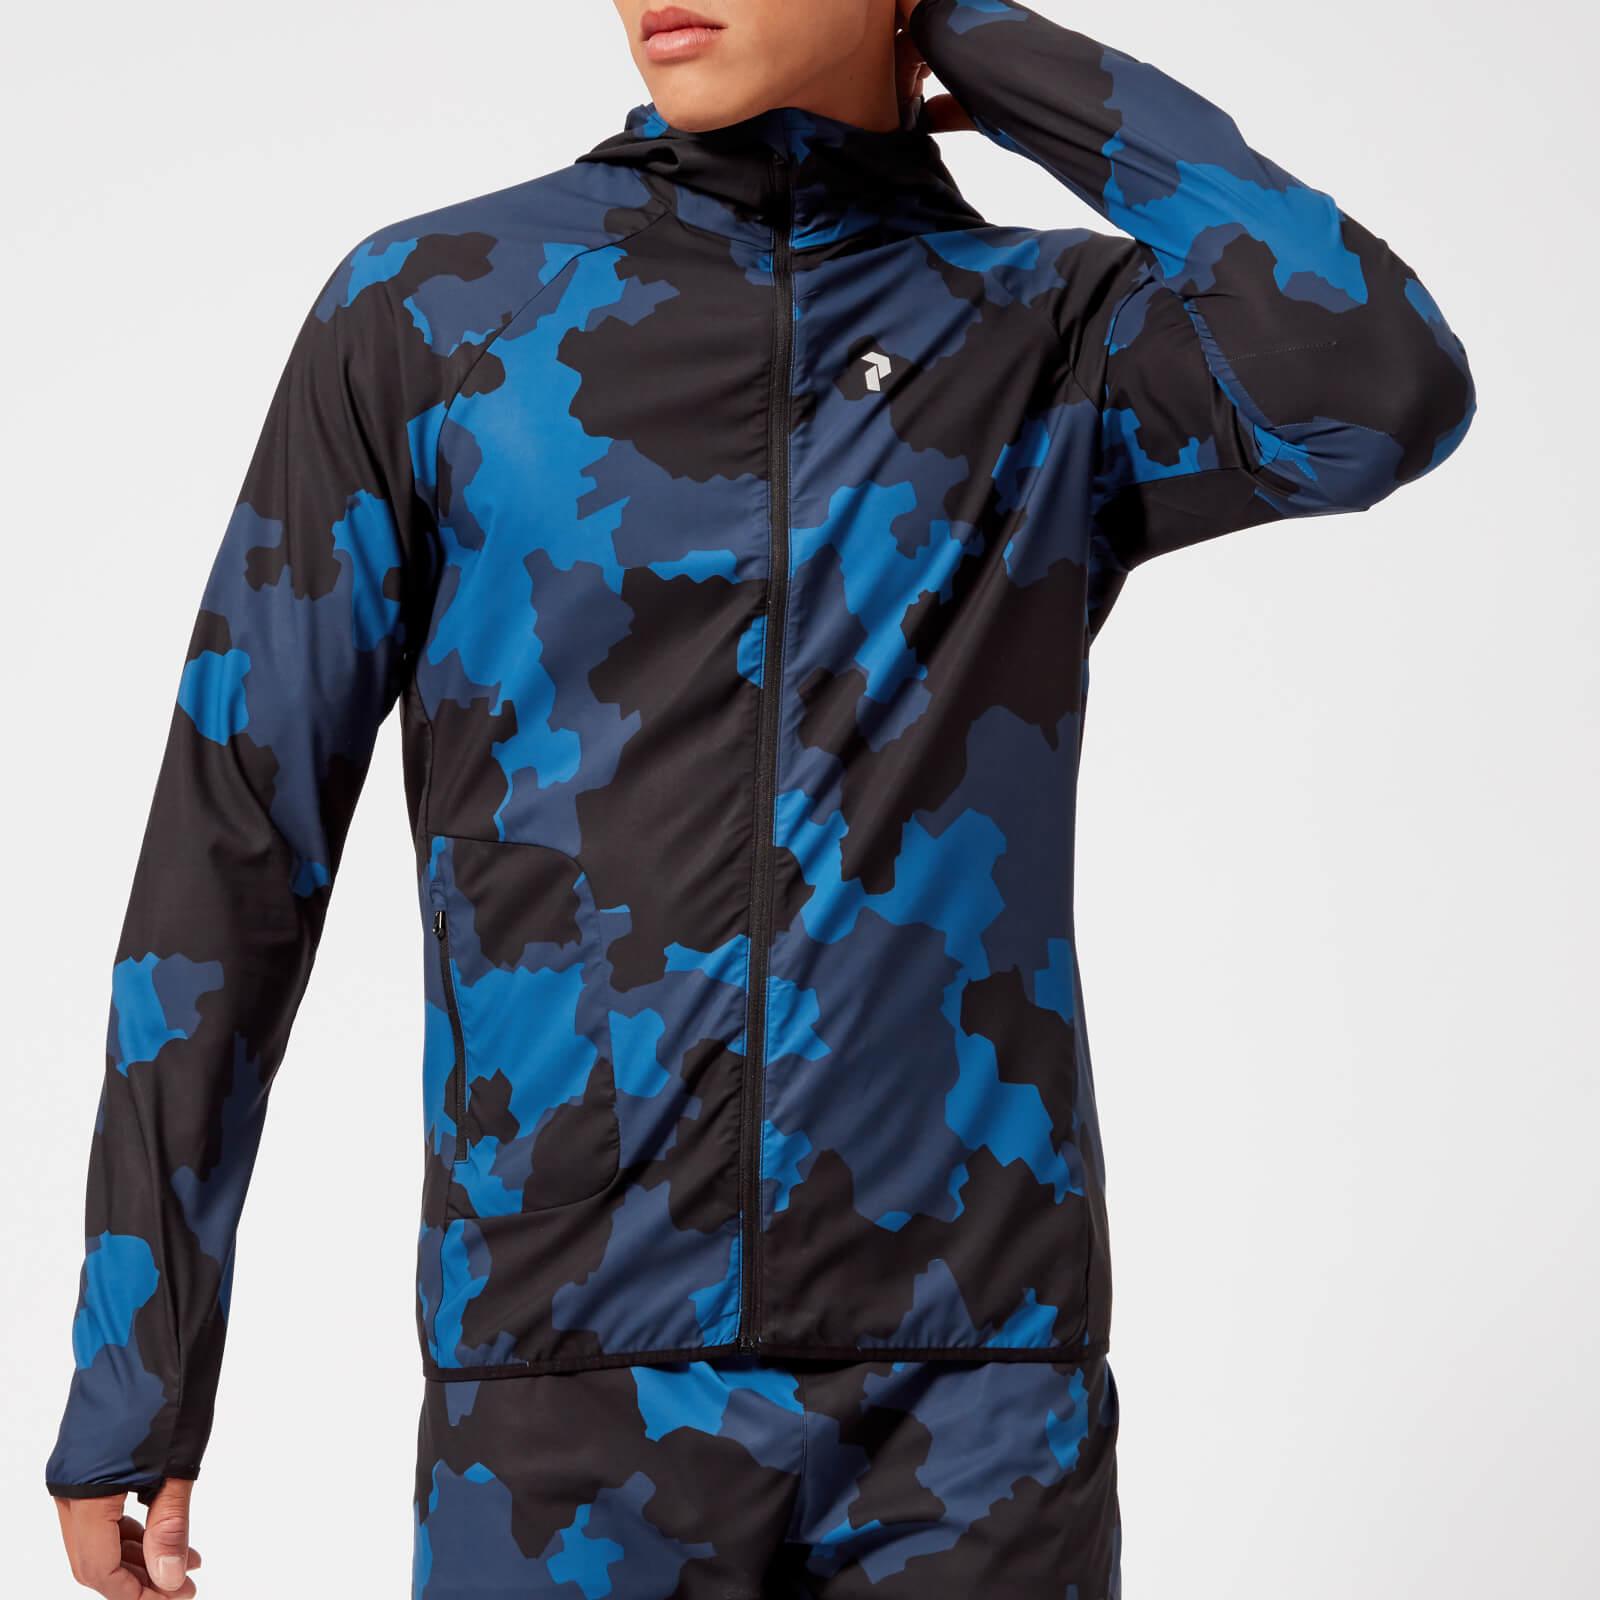 Peak Performance Synthetic Fremont Printed Jacket in Blue for Men - Lyst